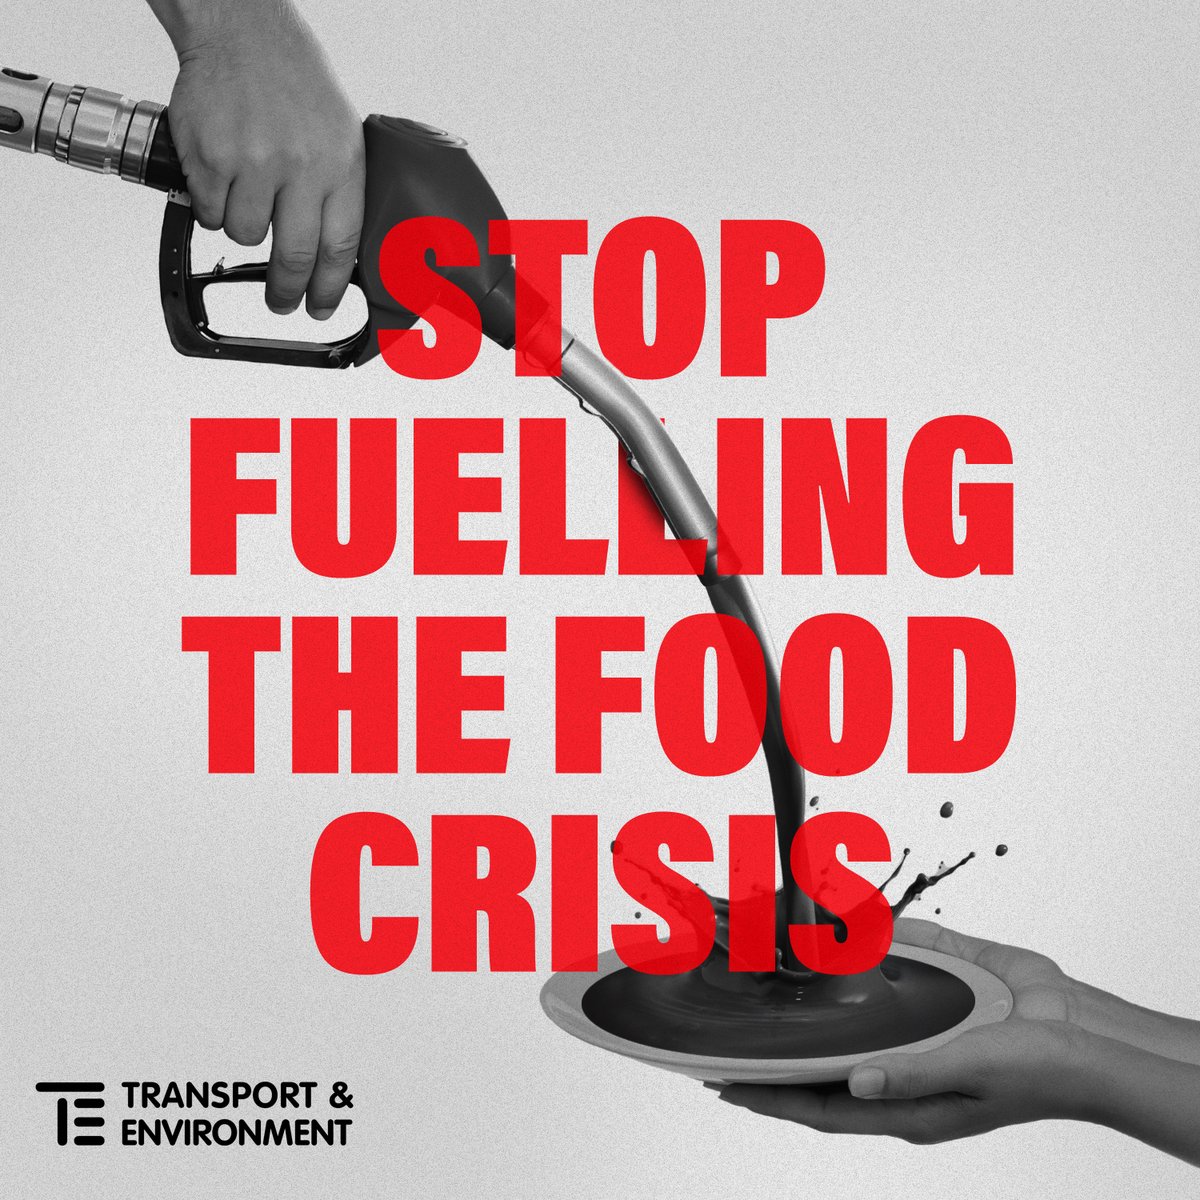 Did you know palm & soy biofuels have 2-3 times higher GHG emissions than their fossil equivalents?

Using food for biofuels is amongst the worst ideas to fight the #climatecrisis.

European institutions must put an end to this during the RED negotiations next week.
@sweden2023eu